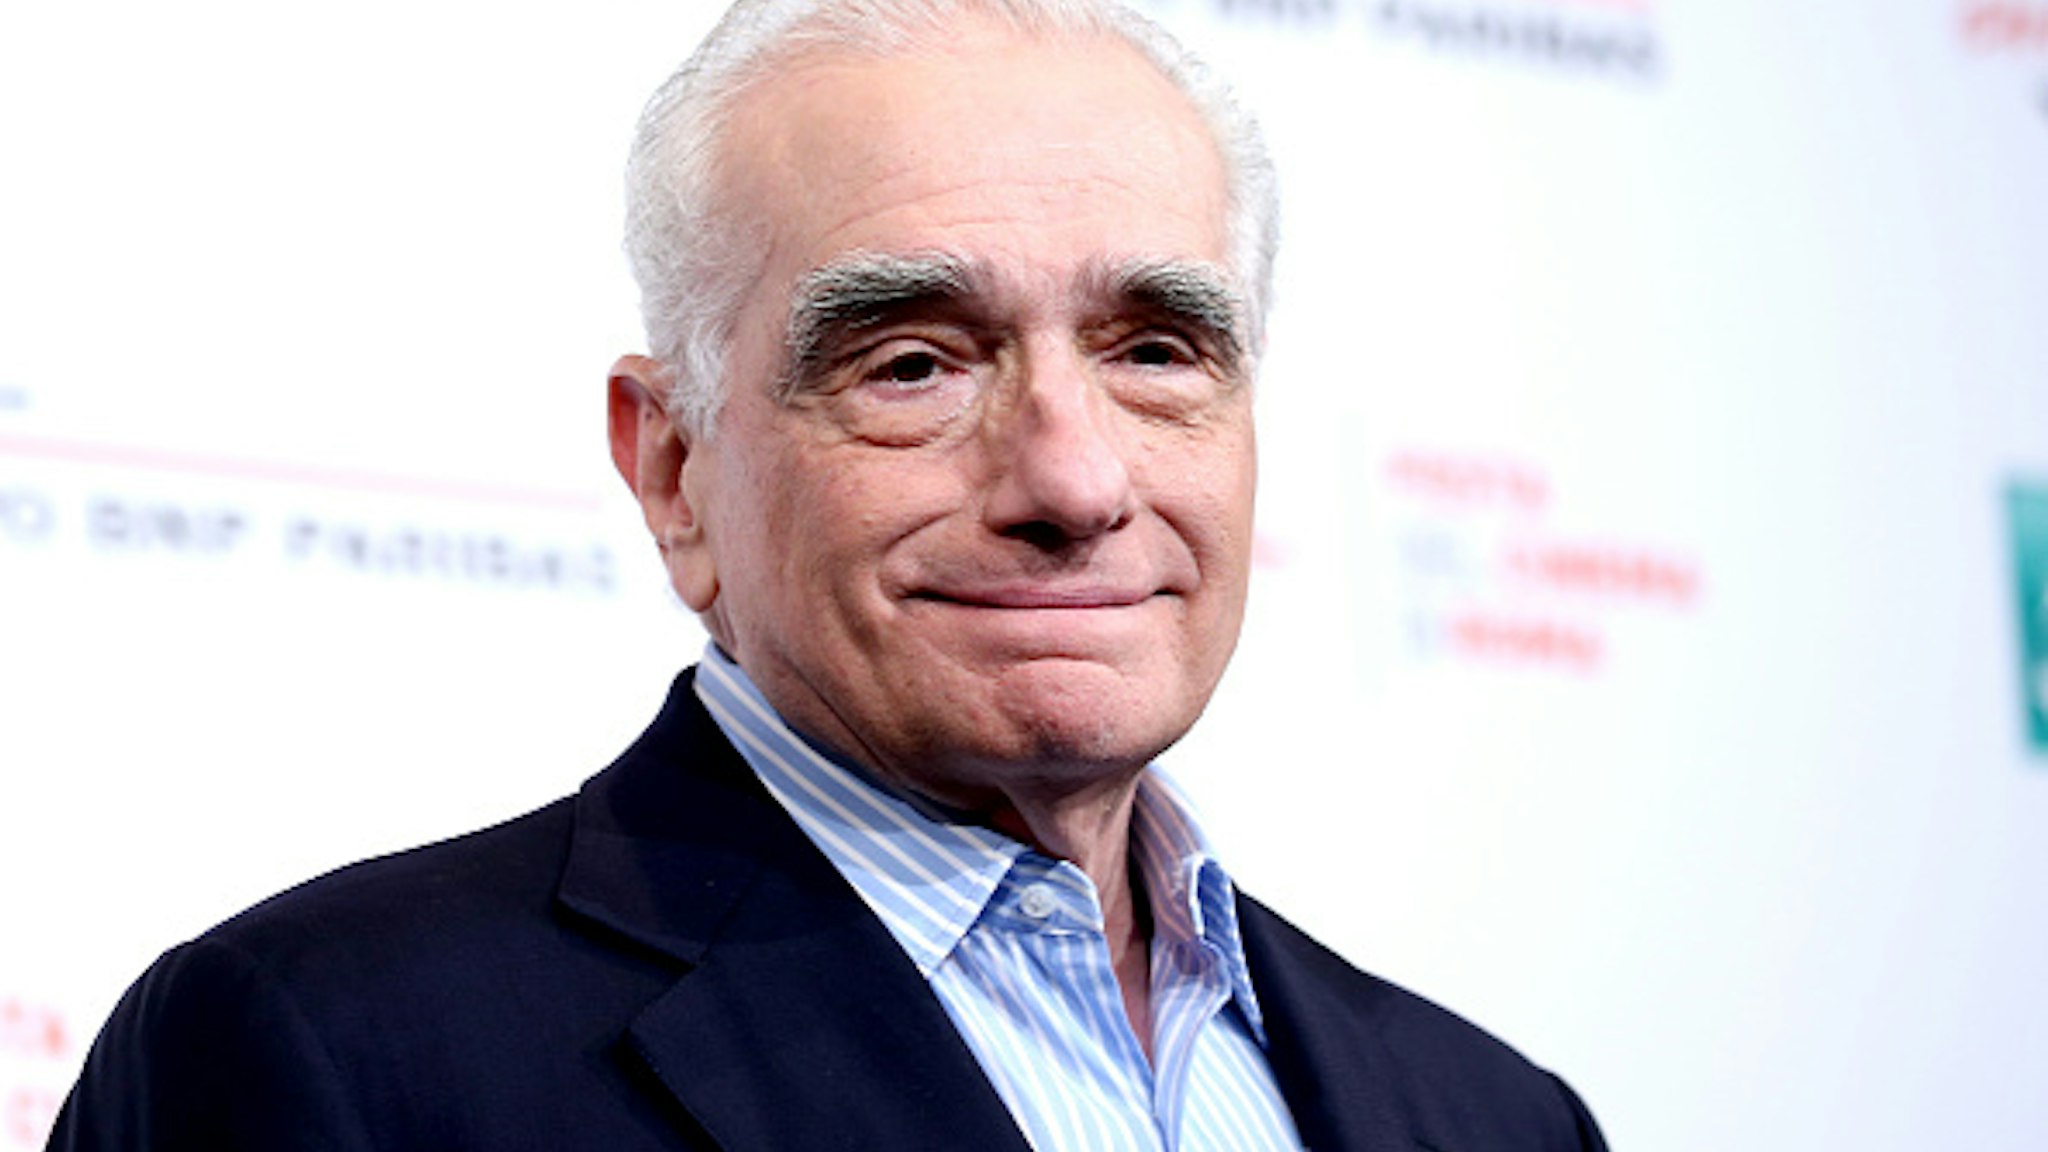 ROME, ITALY - OCTOBER 21: Martin Scorsese attends the photocall of the movie "The Irishman" during the 14th Rome Film Festival on October 21, 2019 in Rome, Italy.